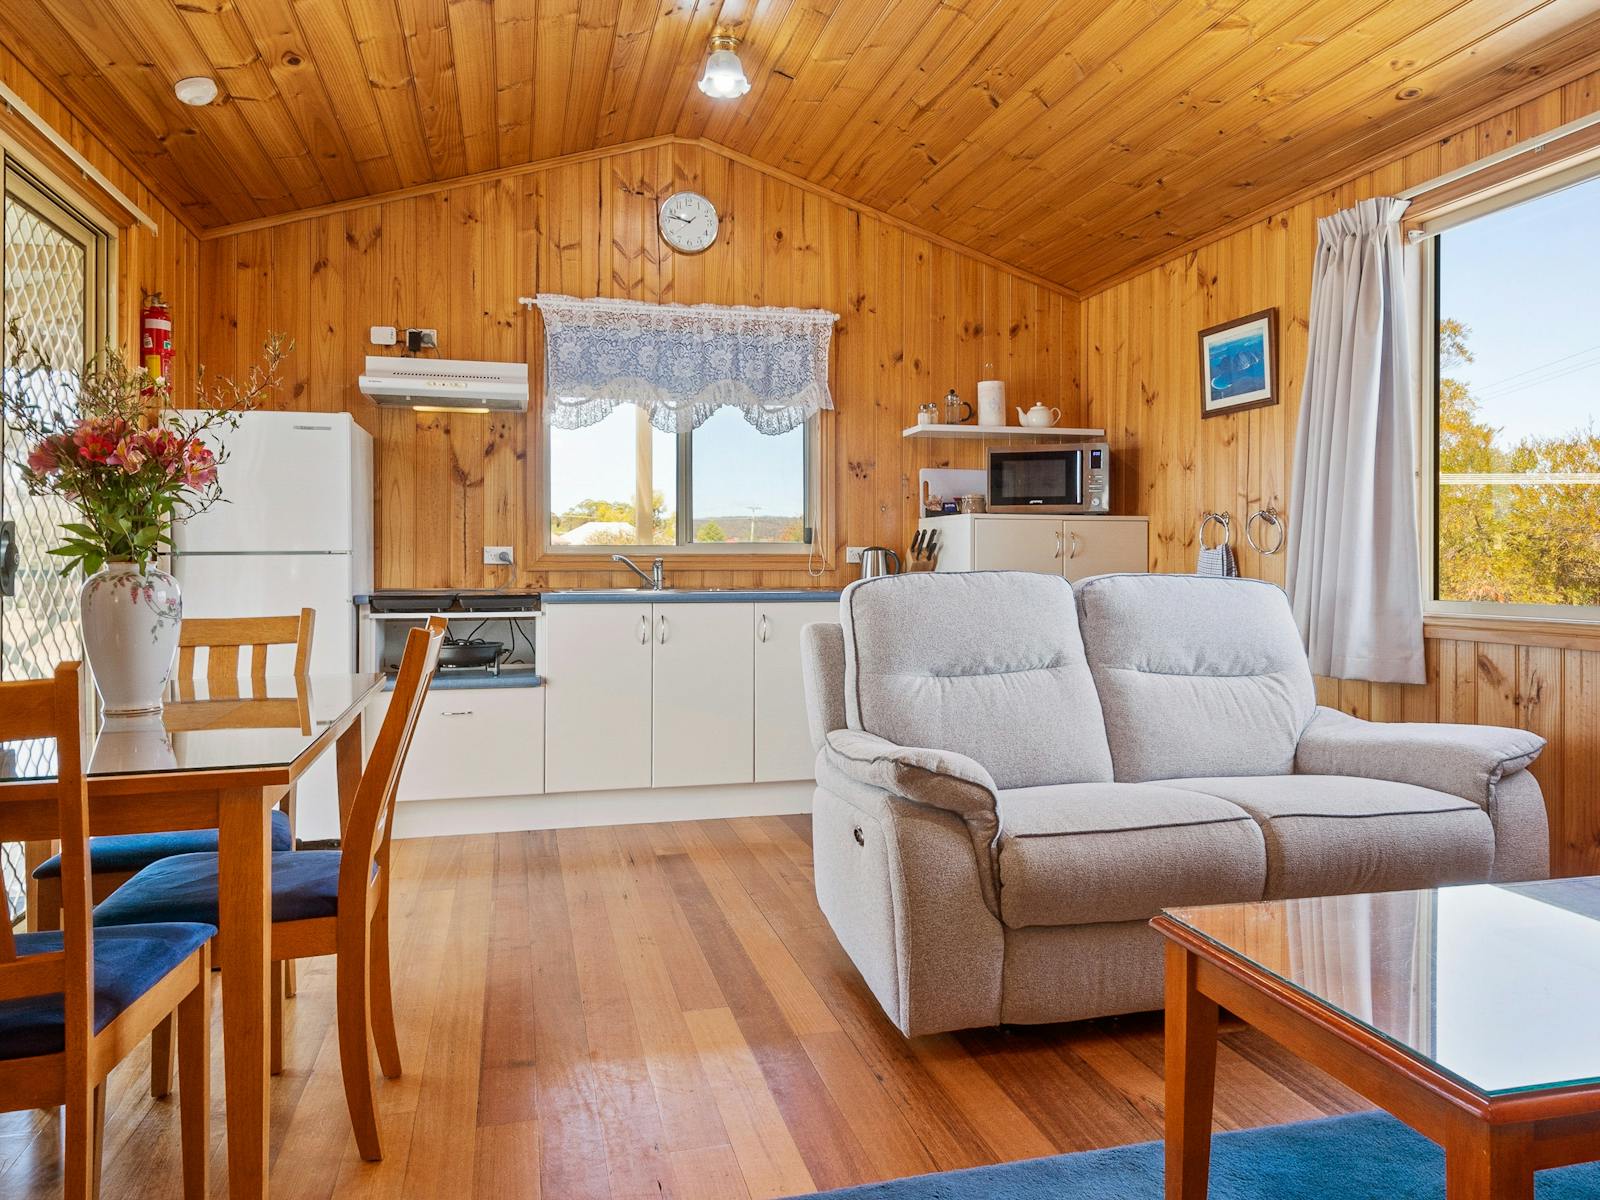 One bedroom timber lined Chalet